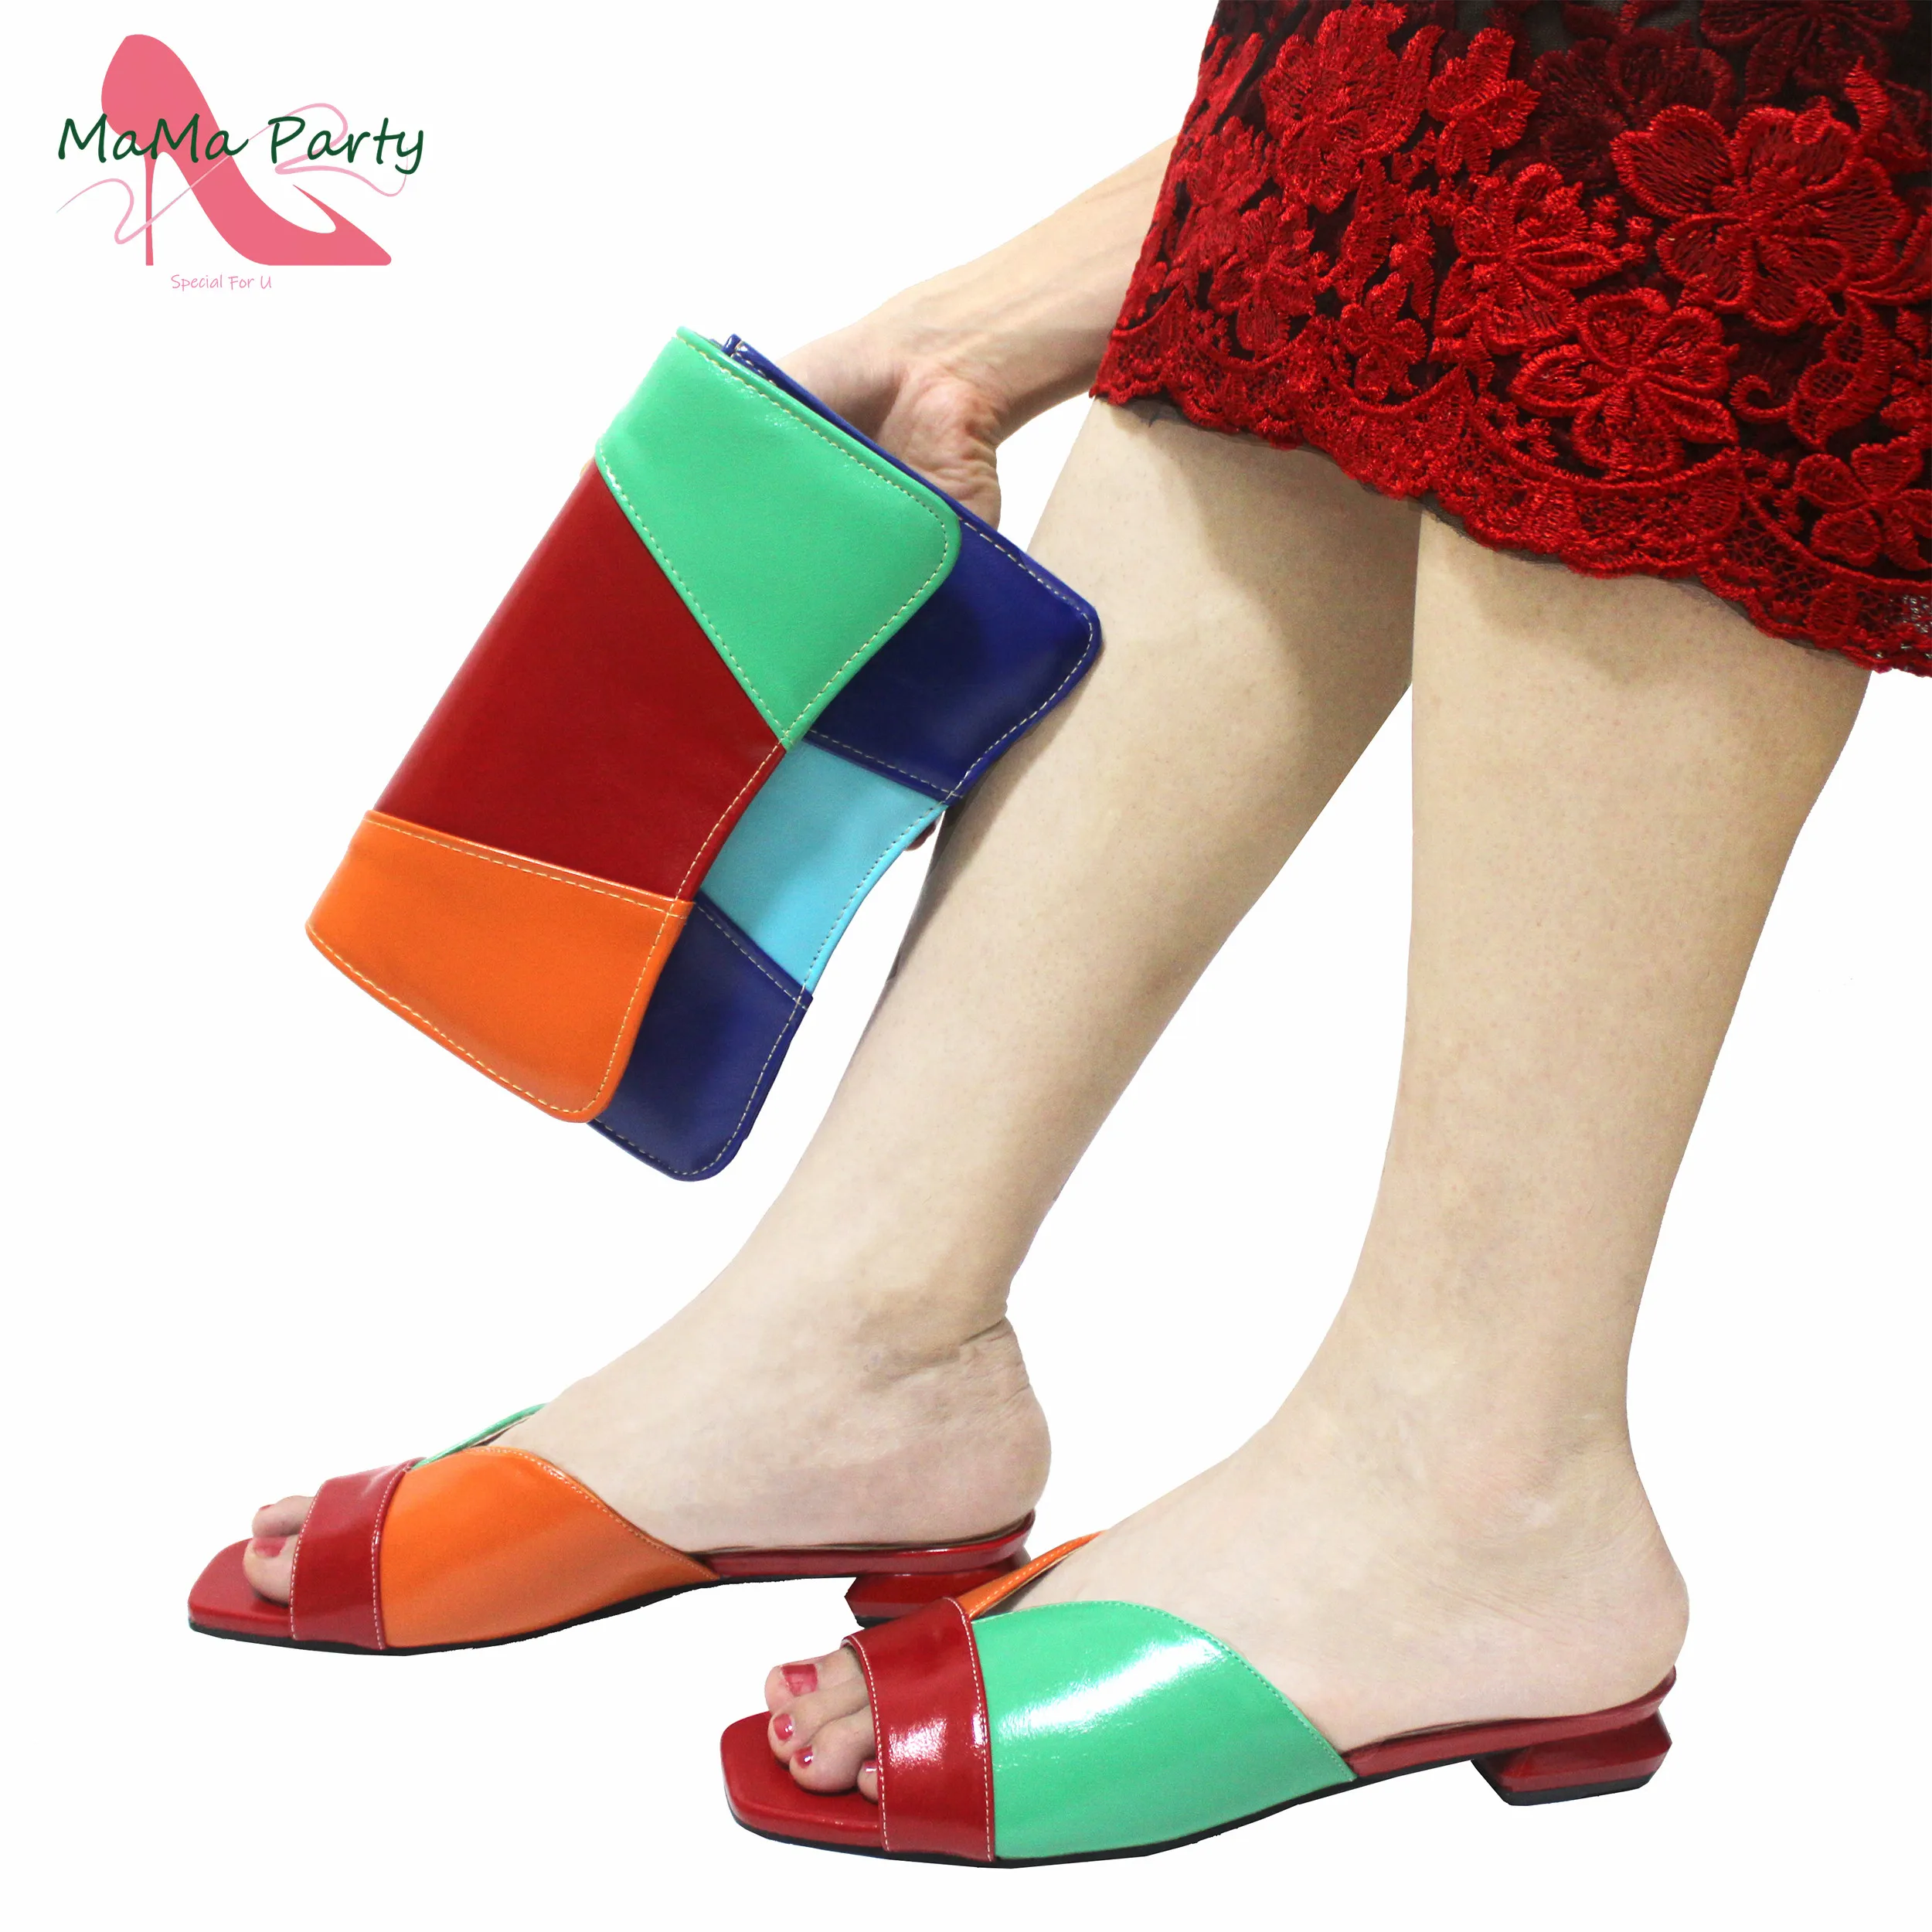 

Red INS Hot Sale Italian Women Shoes and Bag to Match Multi color splicing design Square Heels for Garden Party